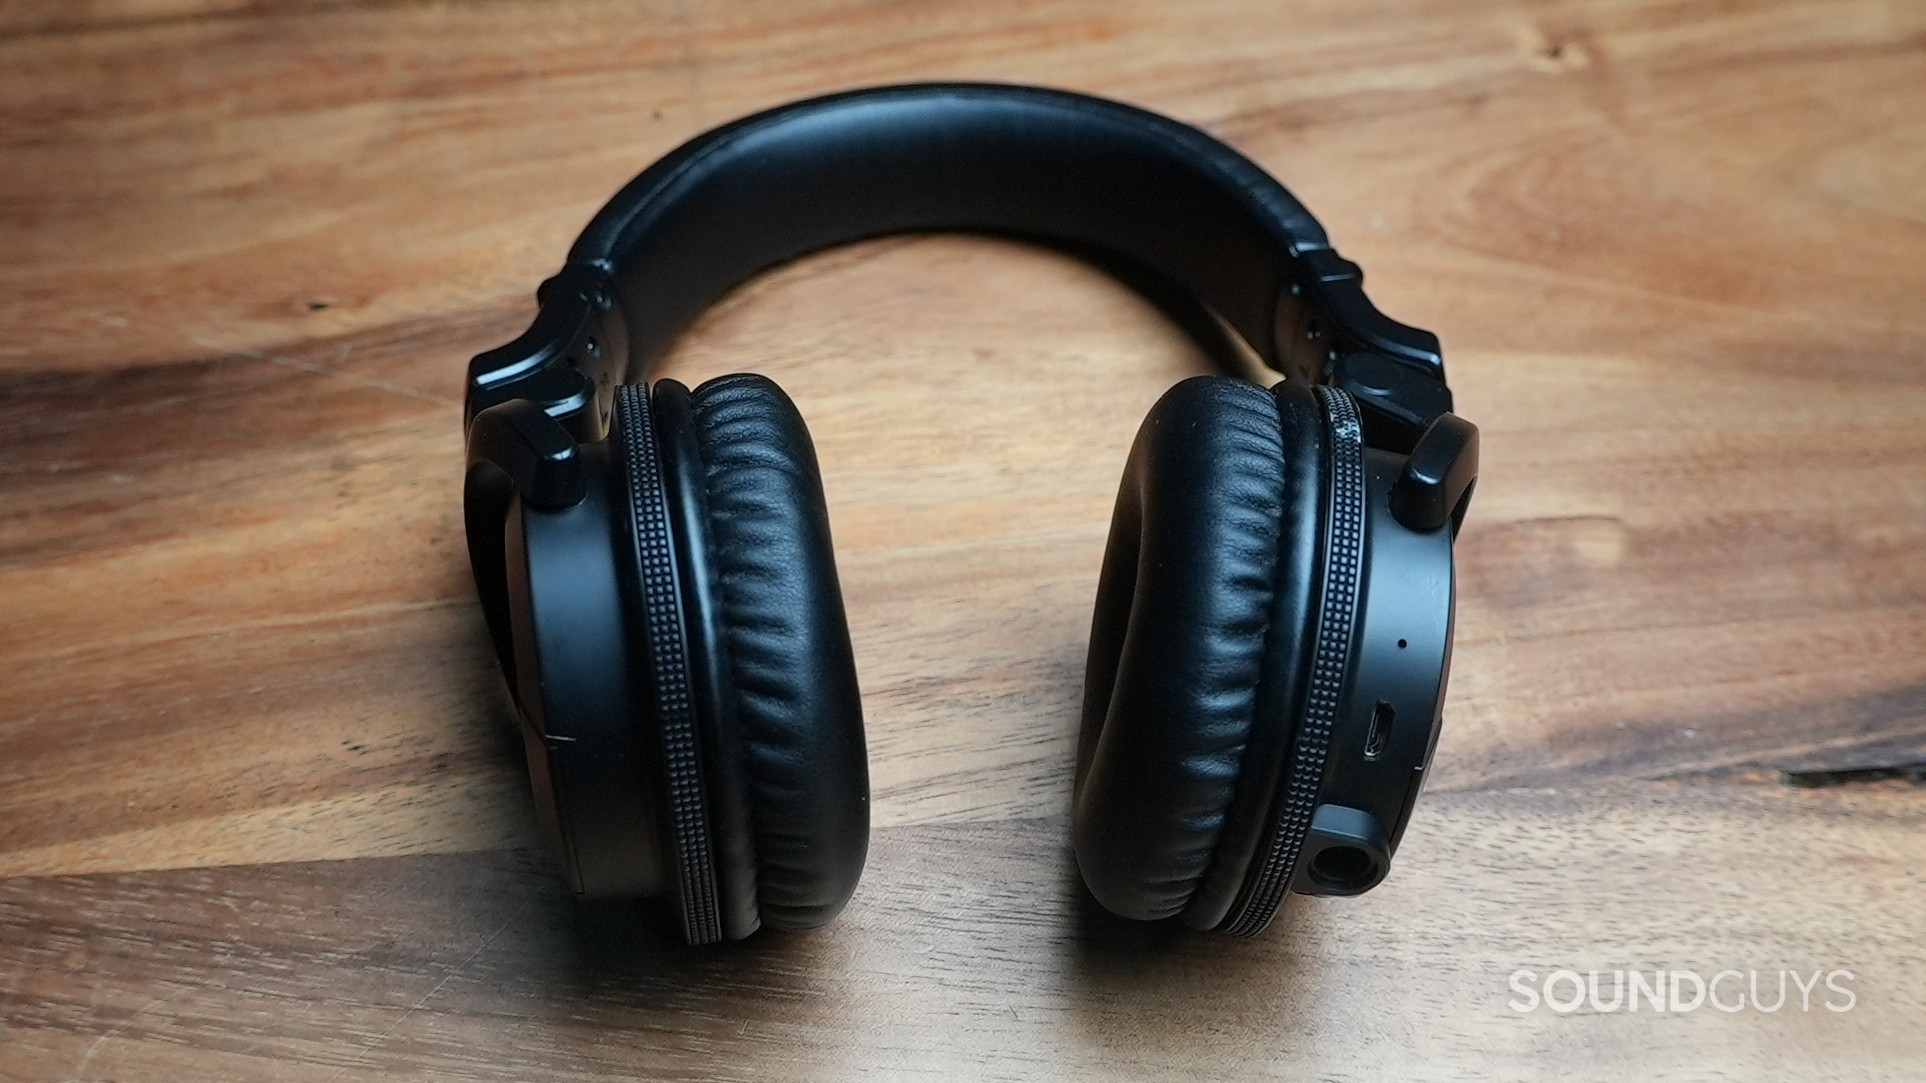 The Pioneer HDJ-CUE1BT lying on t able with its earcups oriented vertically.